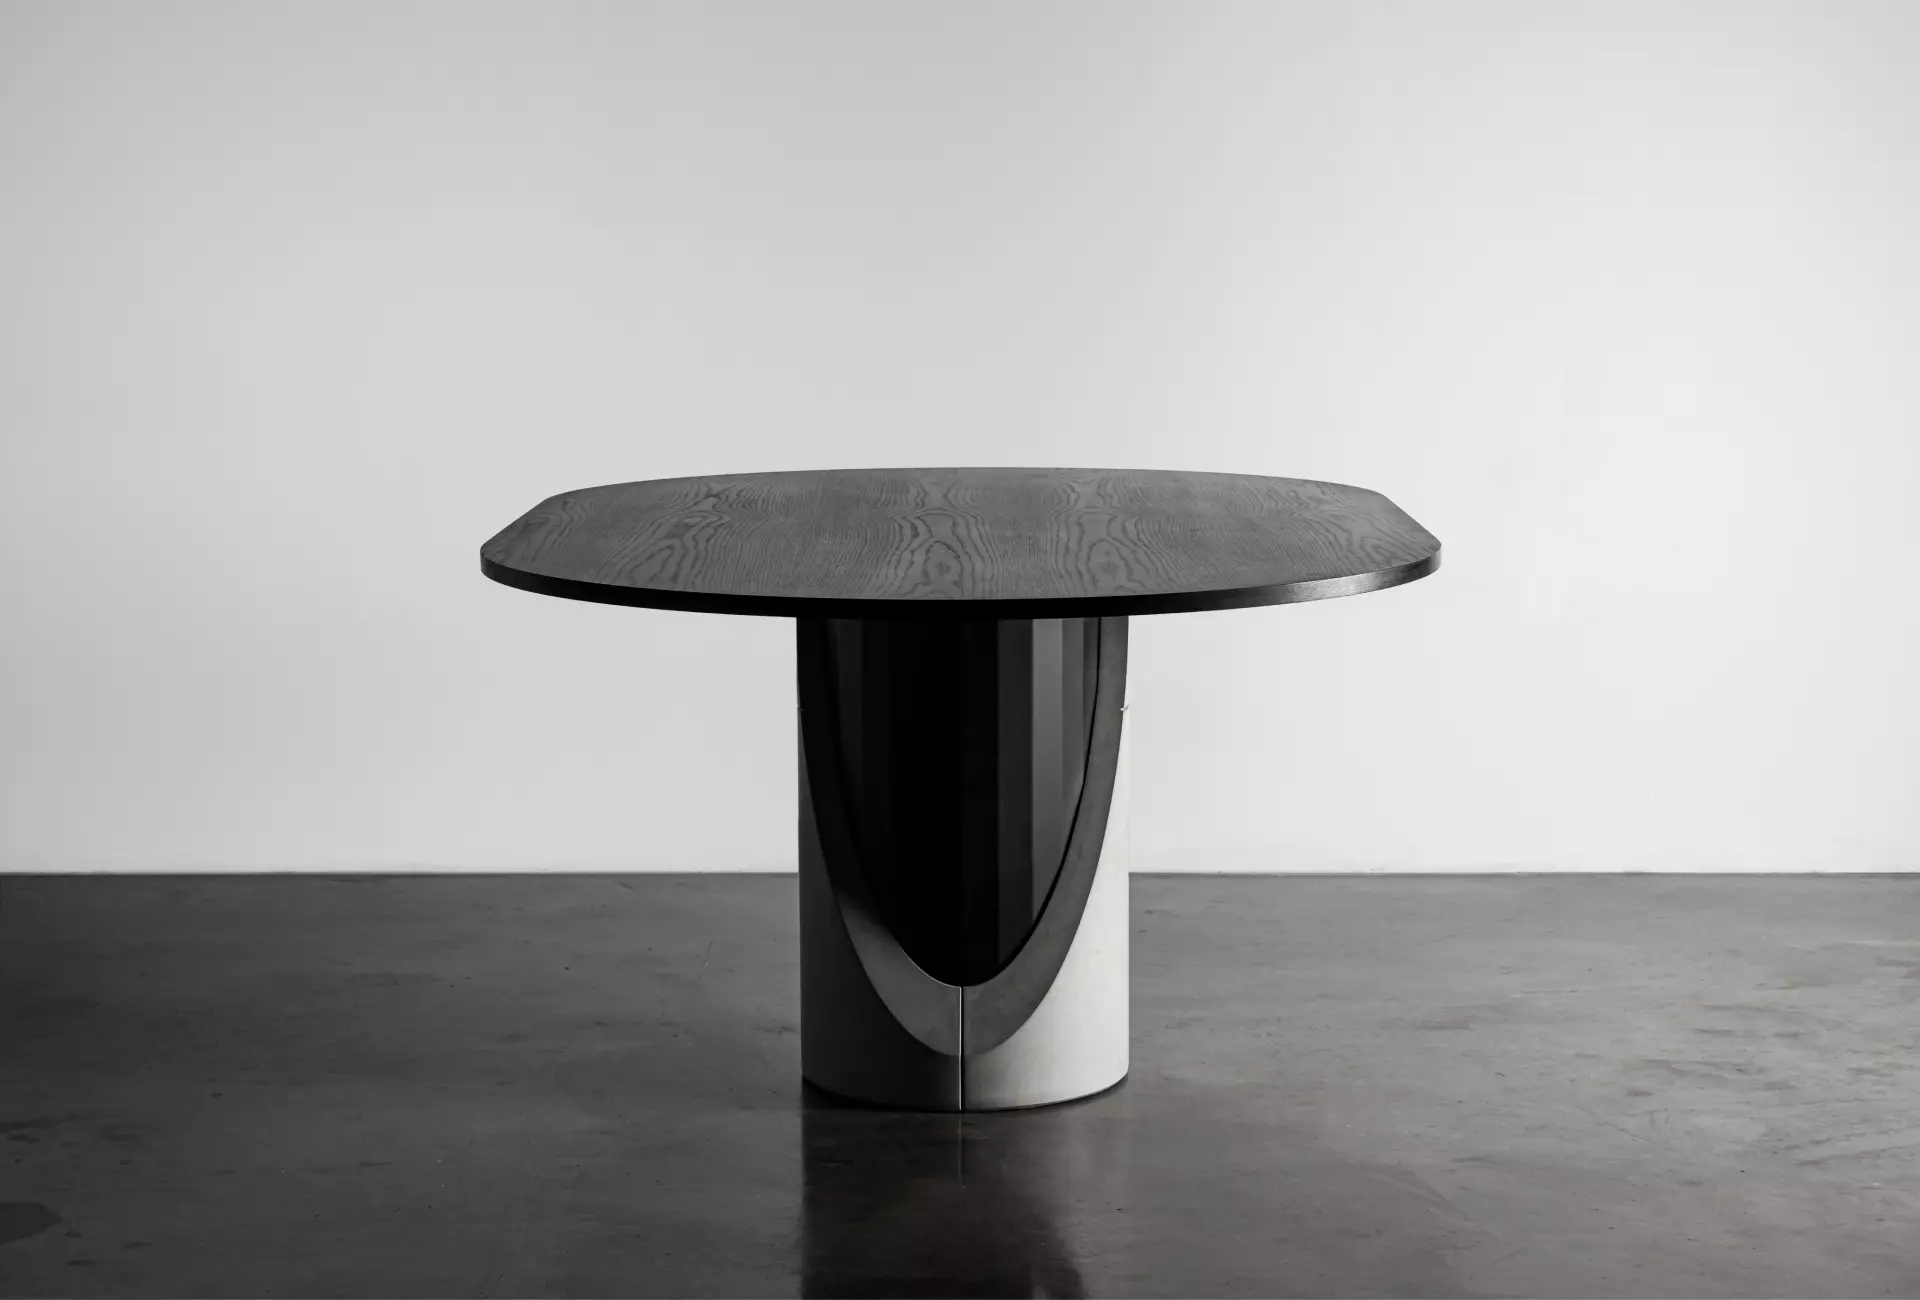 Concrete Dining table for 6 to 8 people black tinted wooden table top and metal and concrete foot for a modern and brutalist style